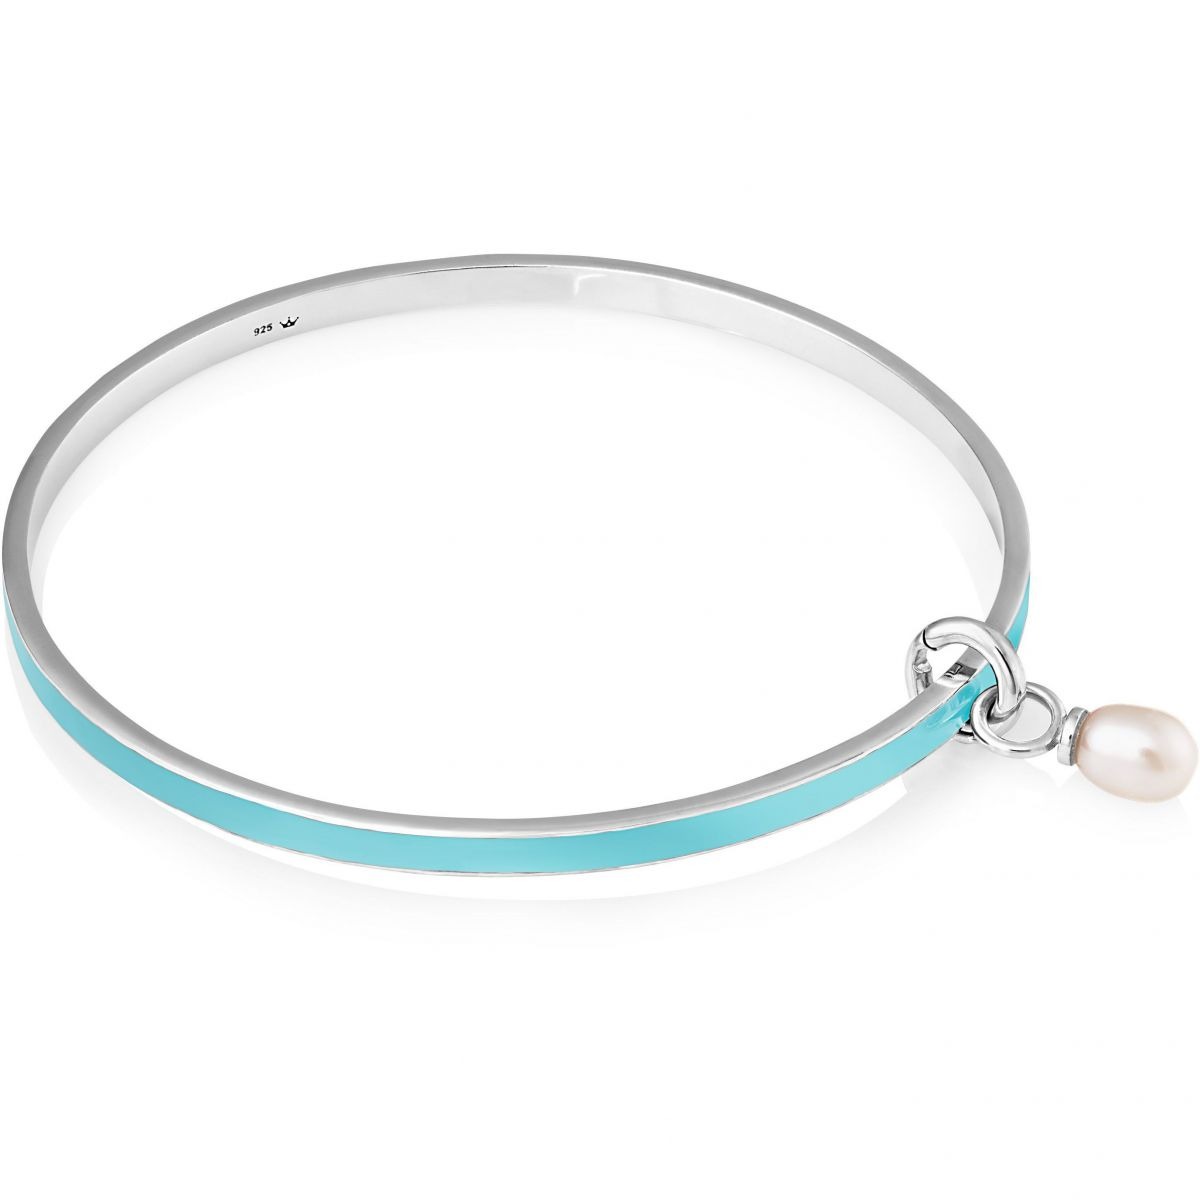 Jersey Pearl Lady Silver Bangles from Watch Shop GOOFASH